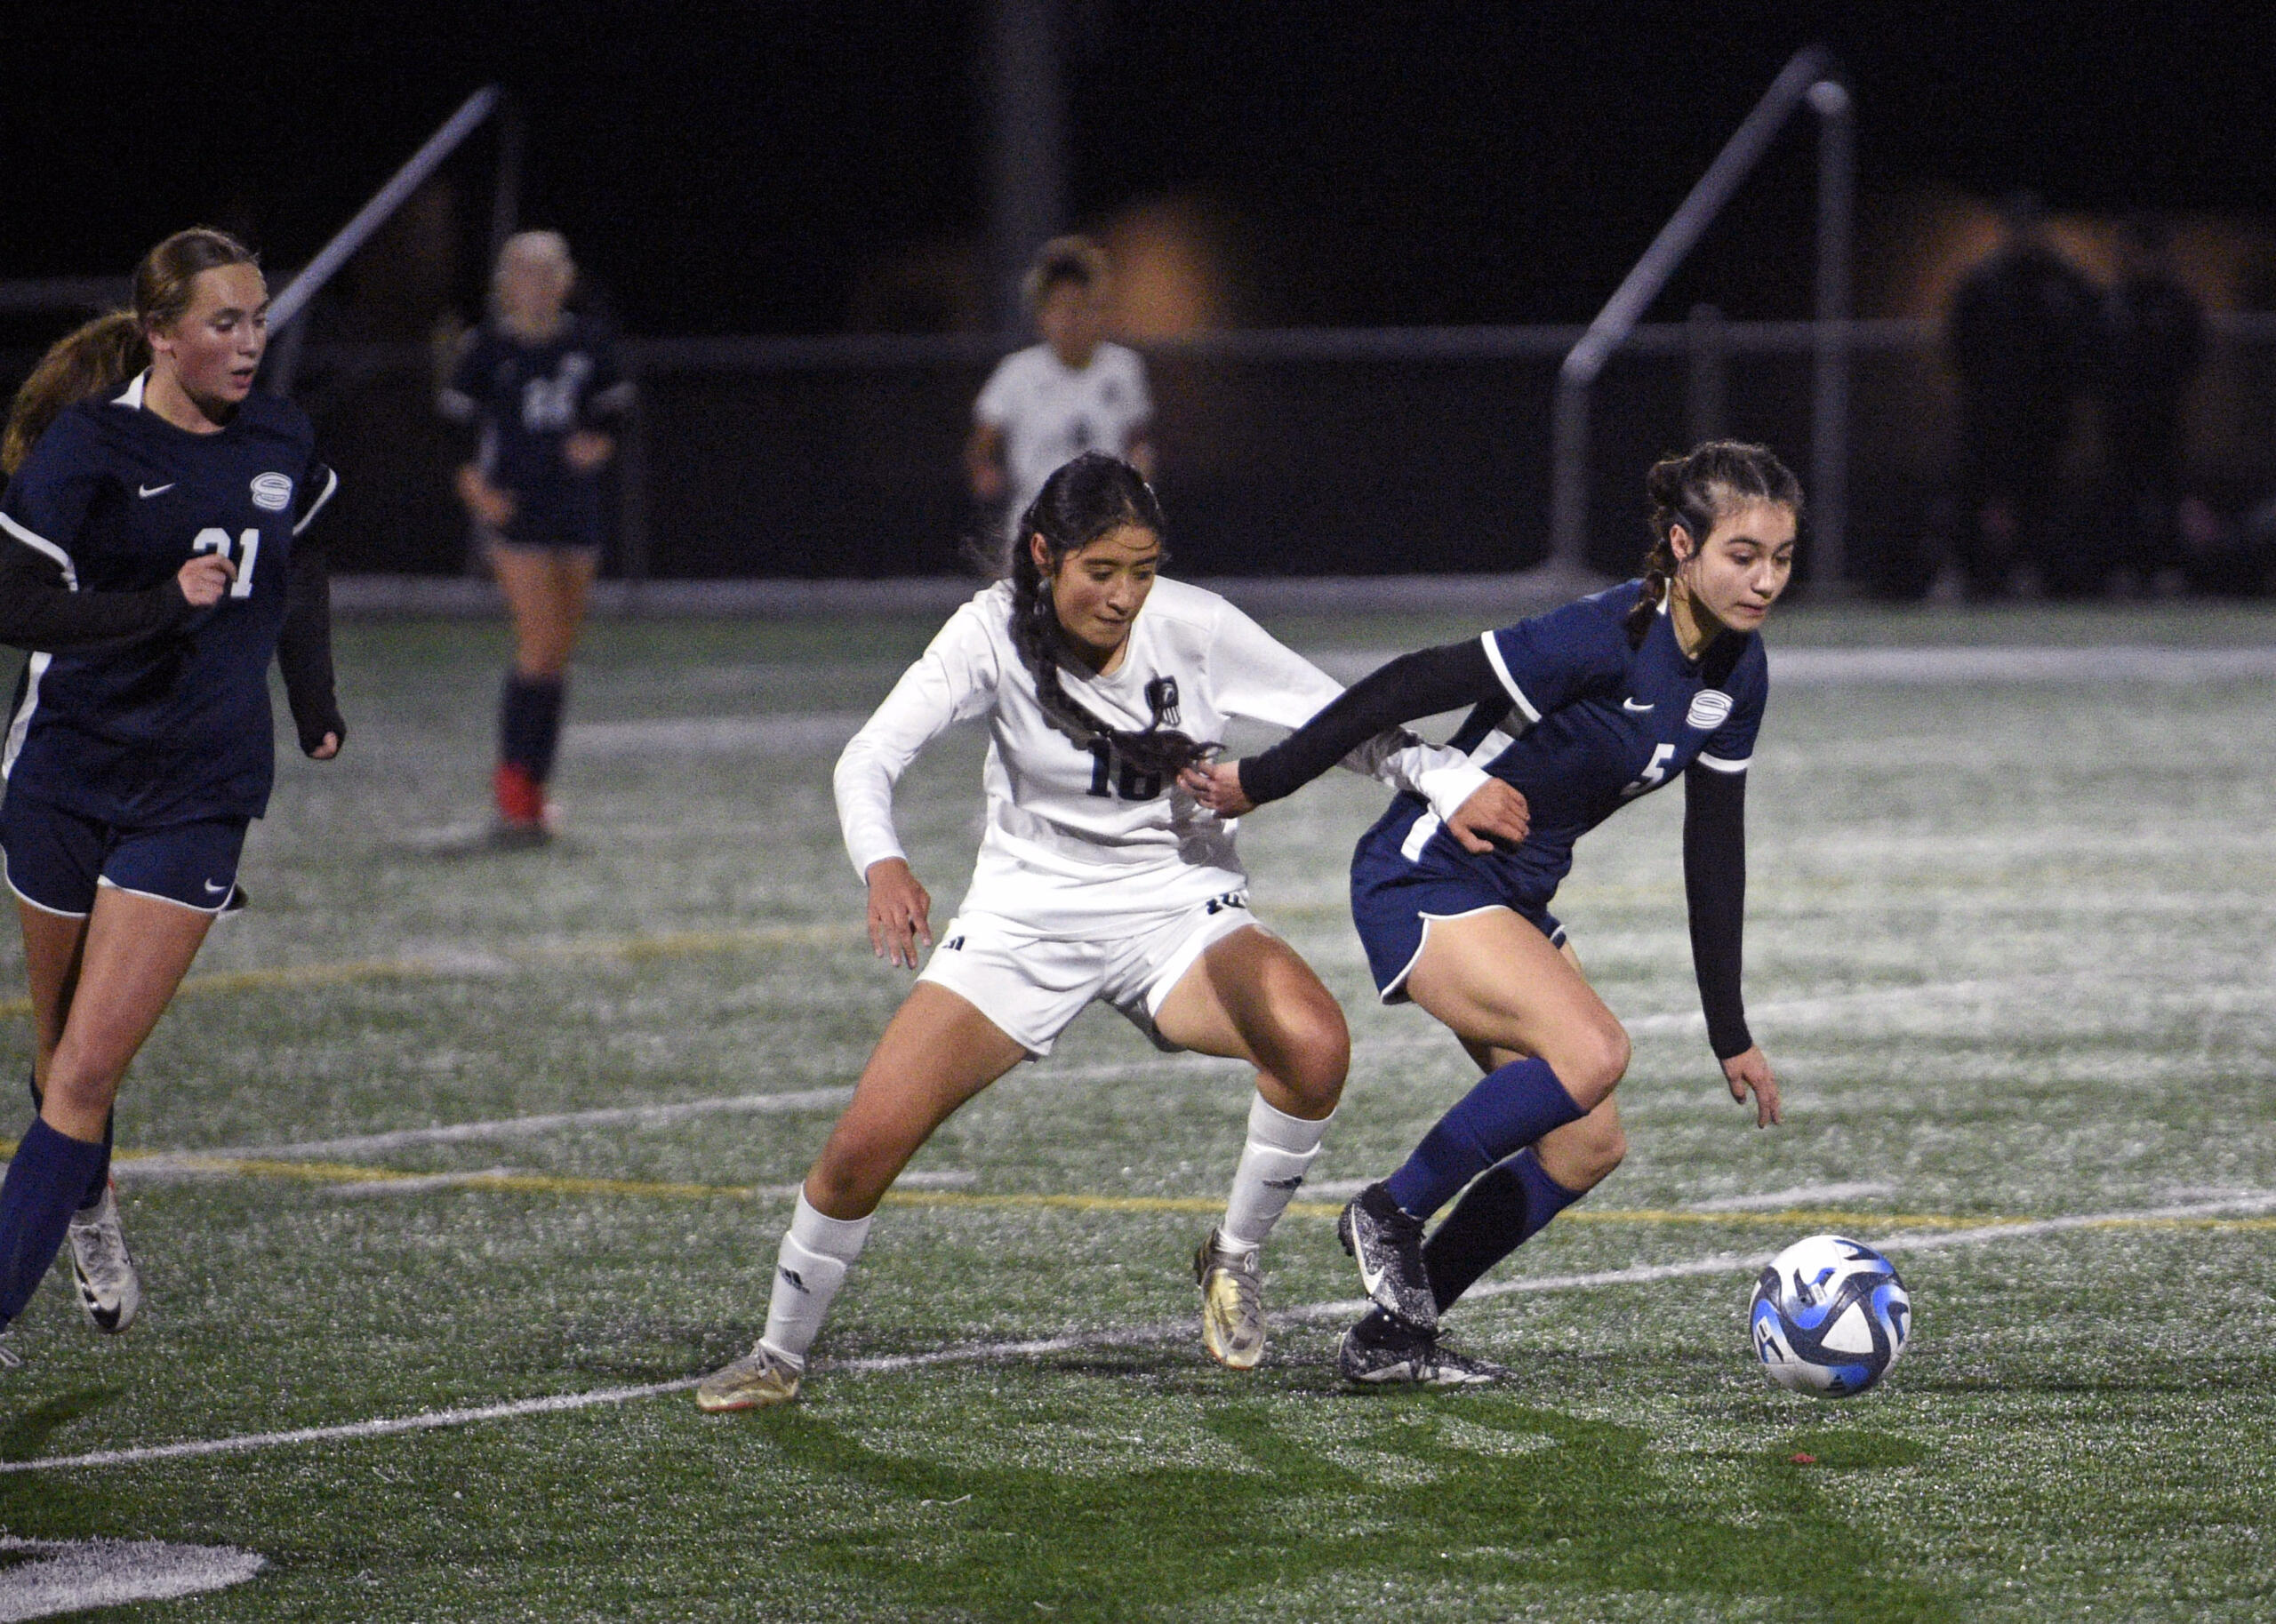 Skyview’s Dea Covarrubias, right, and Union’s Guadalupe Gutierrez battle for possession of the ball during a 4A Greater St. Helens League girls soccer match on Wednesday, Oct. 25, 2023, at Skyview High School.